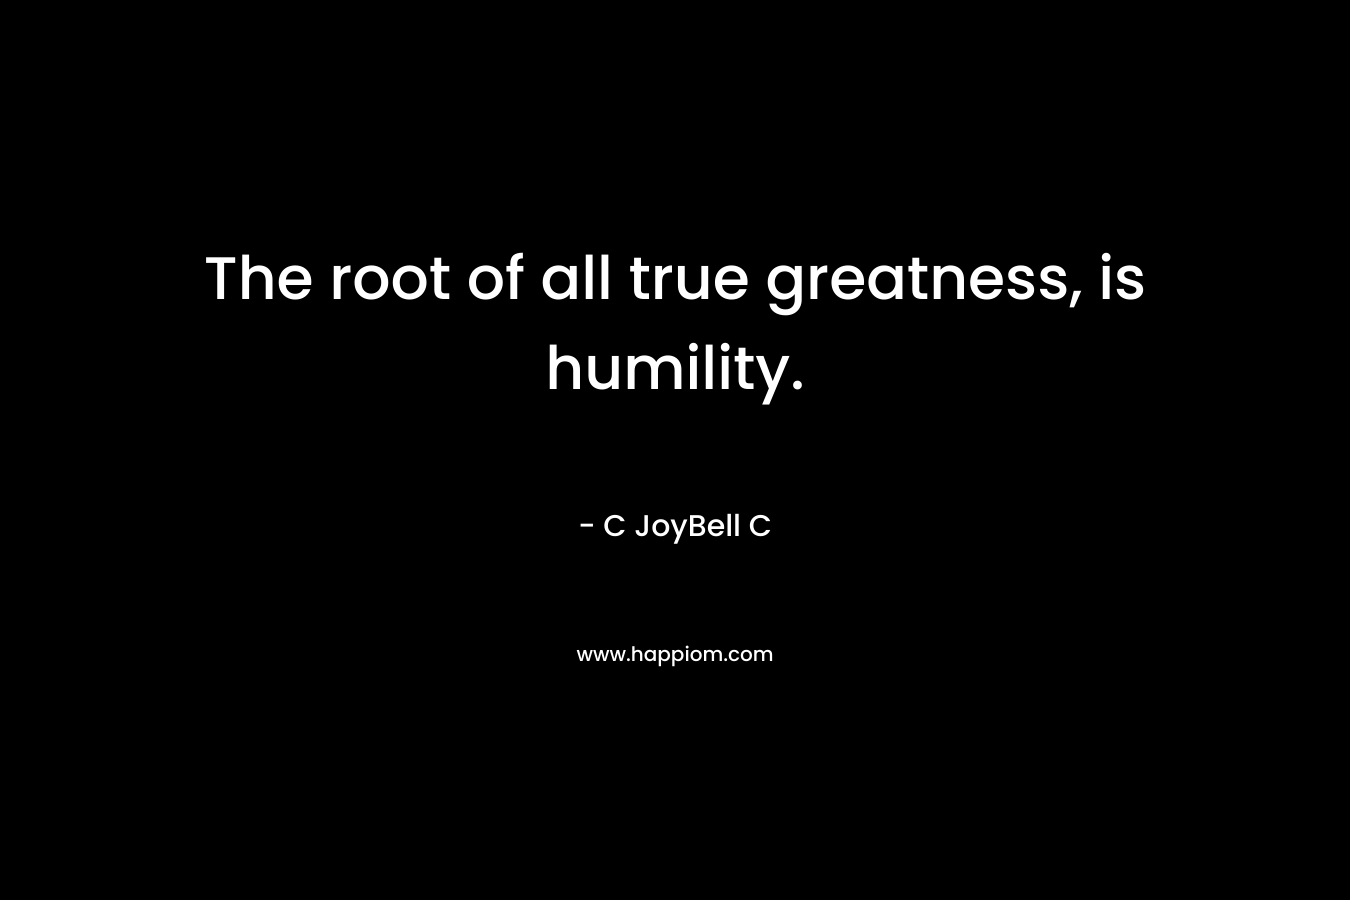 The root of all true greatness, is humility. – C JoyBell C